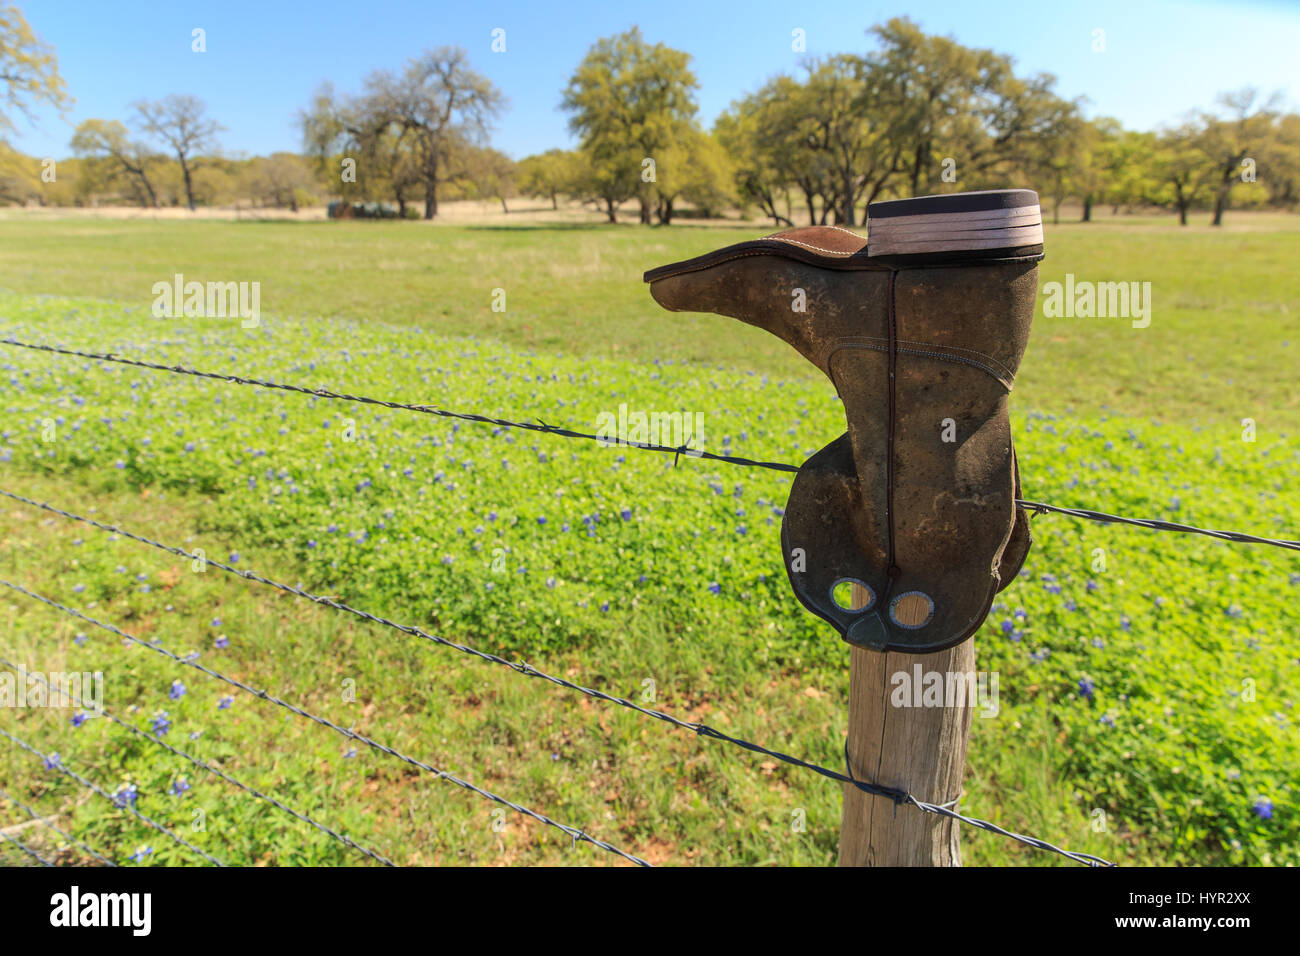 A barbed wire fence, with boots on the post, separates the bluebonnets from the road on Willow City Loop, Texas. Stock Photo